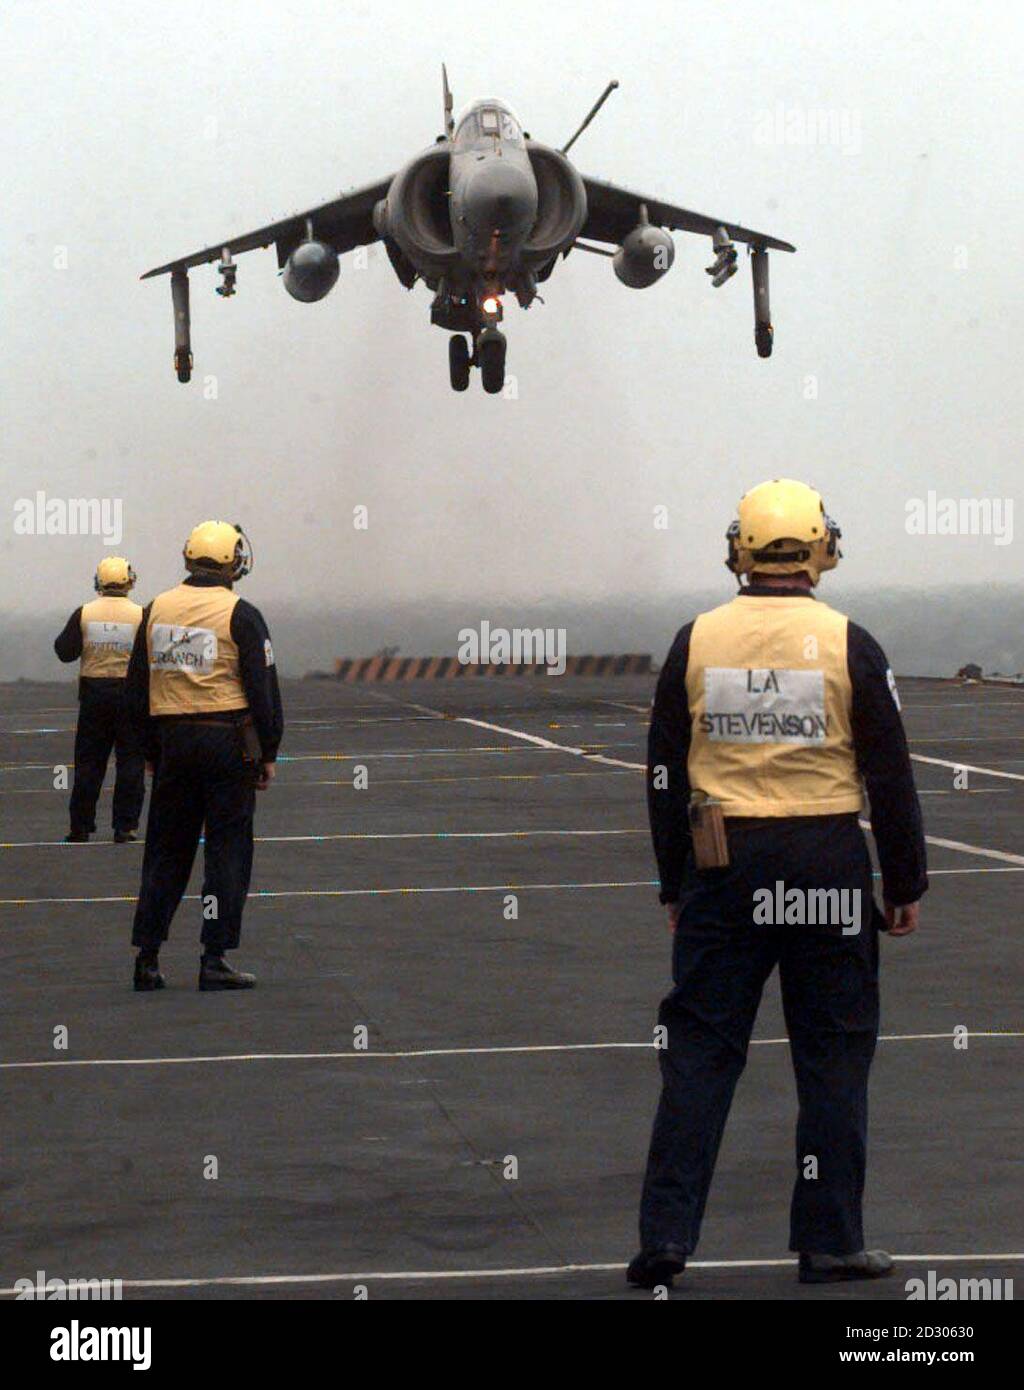 An  FA2 Sea Harrier landing on the Deck of HMS Invincible aircraft carrier as it joins the NATO forces off the Balkan coast. The aircraft will boost the British contribution to airstrikes against Serbian military targets.    *16/04/1999 of an FA2 Sea Harrier landing on the Deck of HMS Invincible aircraft carrier. A similar plane was coming into land at Royal Navy Air Station Yeovilton, Somerset Monday October 8, 2001 but ended up in the River Yeo close to base. The plane failed to stop on the runway and the pilot was forced to eject. The plane ran off the end of the runway and ended up submerg Stock Photo